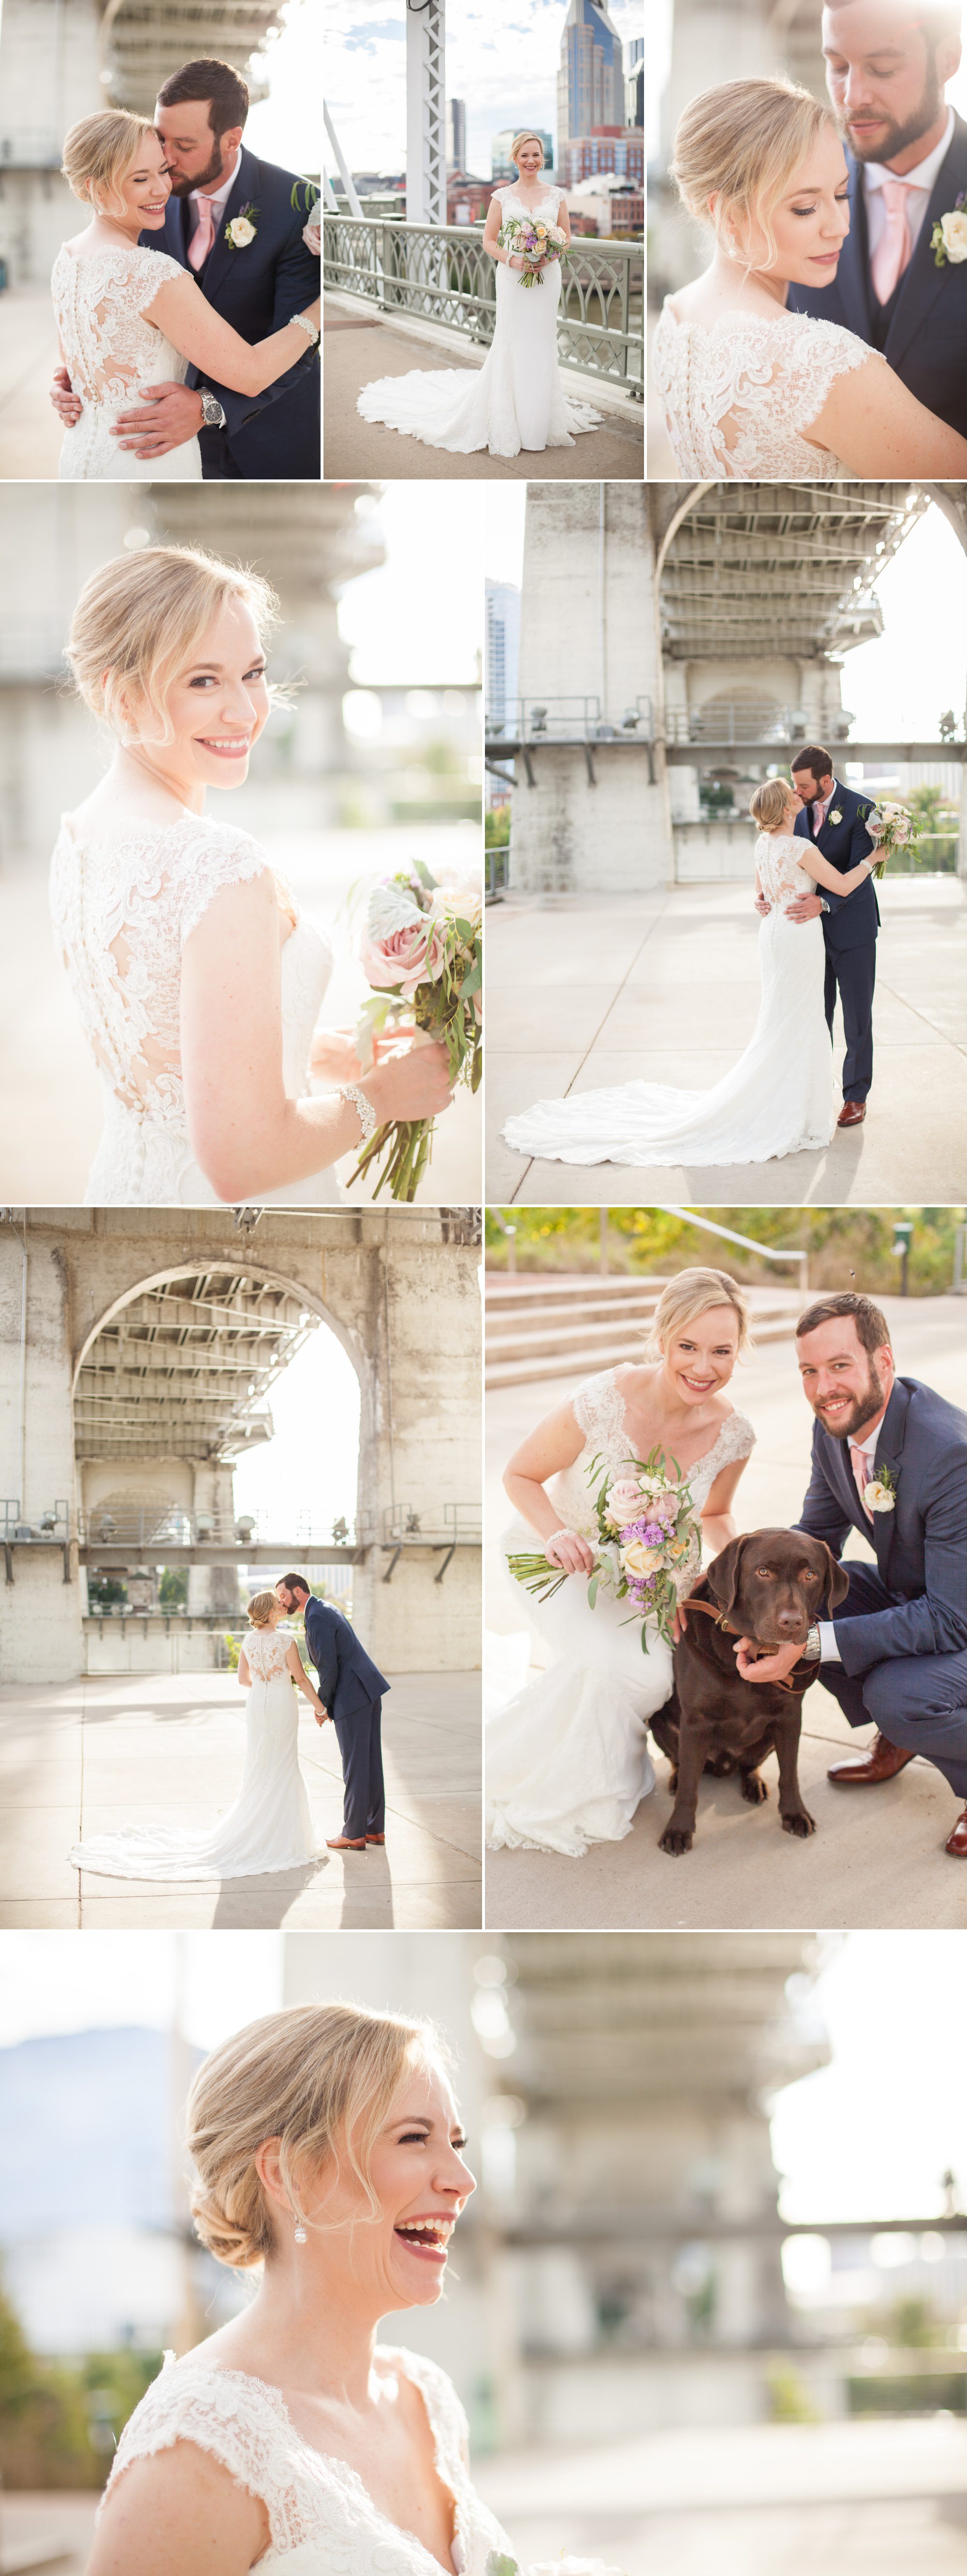 bride and groom wedding photography with dog under pedestrian bridge before wedding photography at Musicians Hall of Fame in Nashville TN photos by Krista Lee 